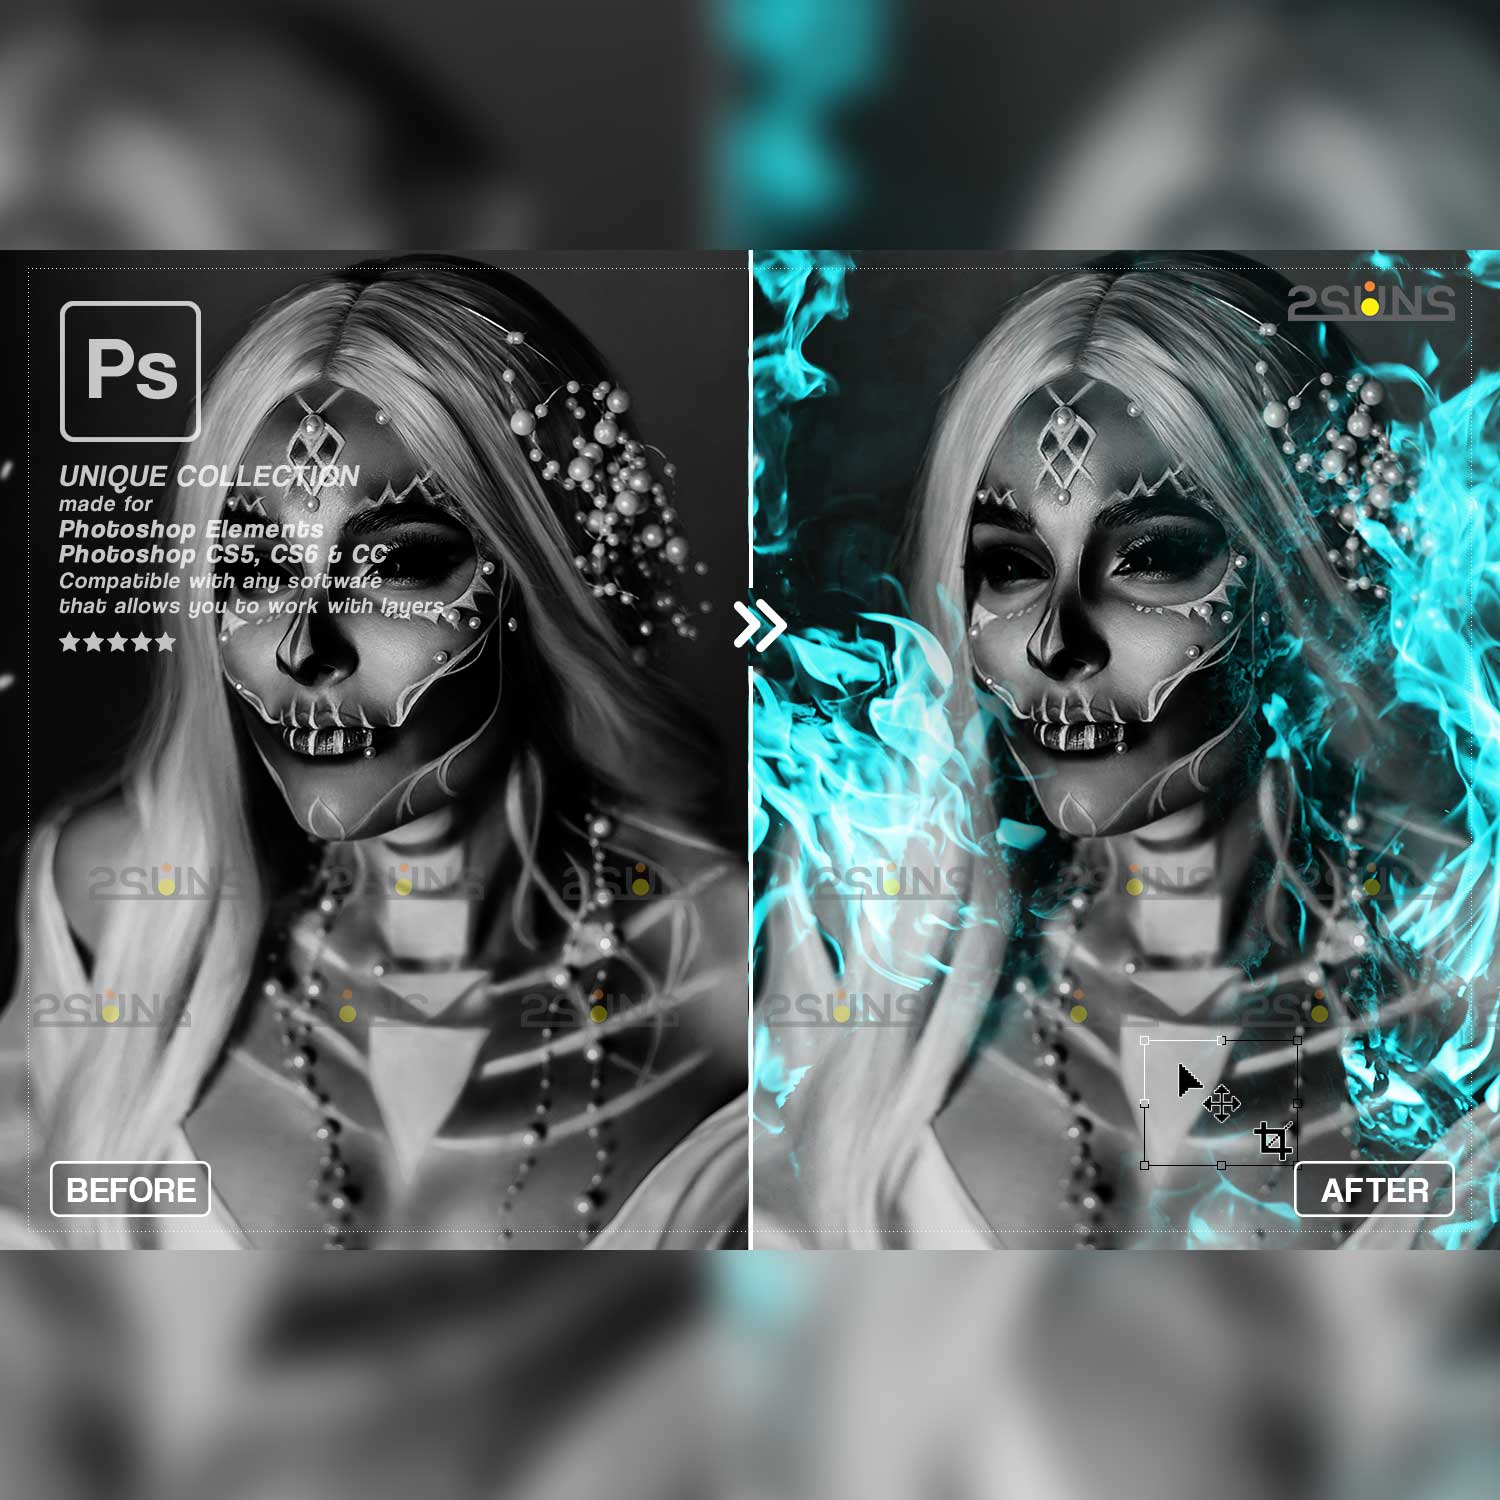 Burn & Neon Fire Photoshop Overlays cover image.